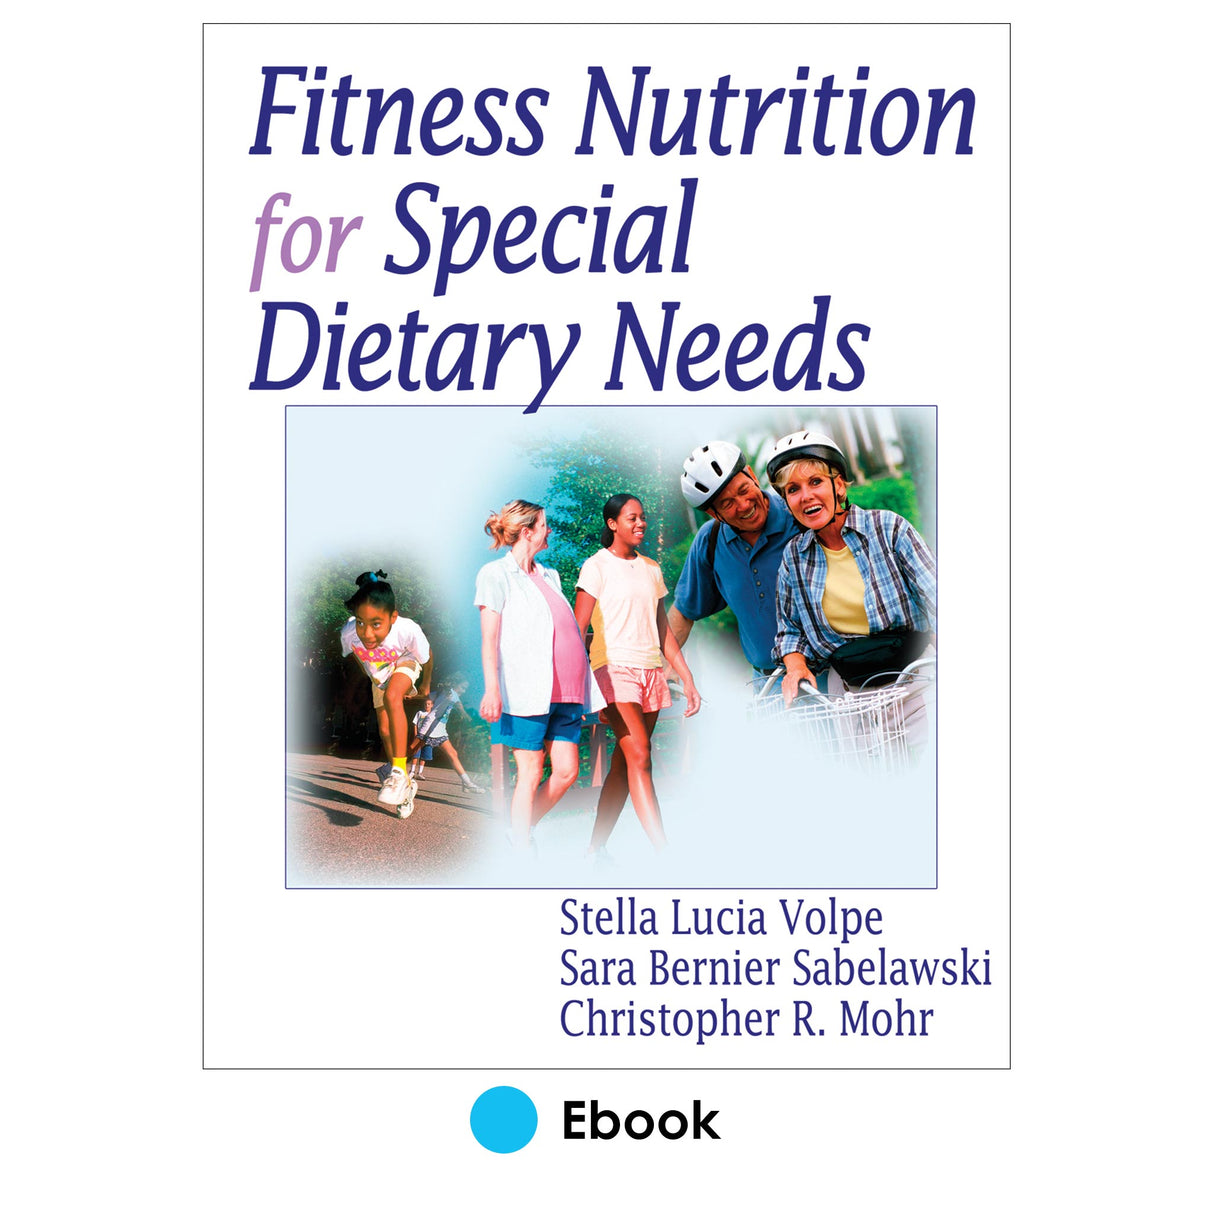 Fitness Nutrition for Special Dietary Needs PDF